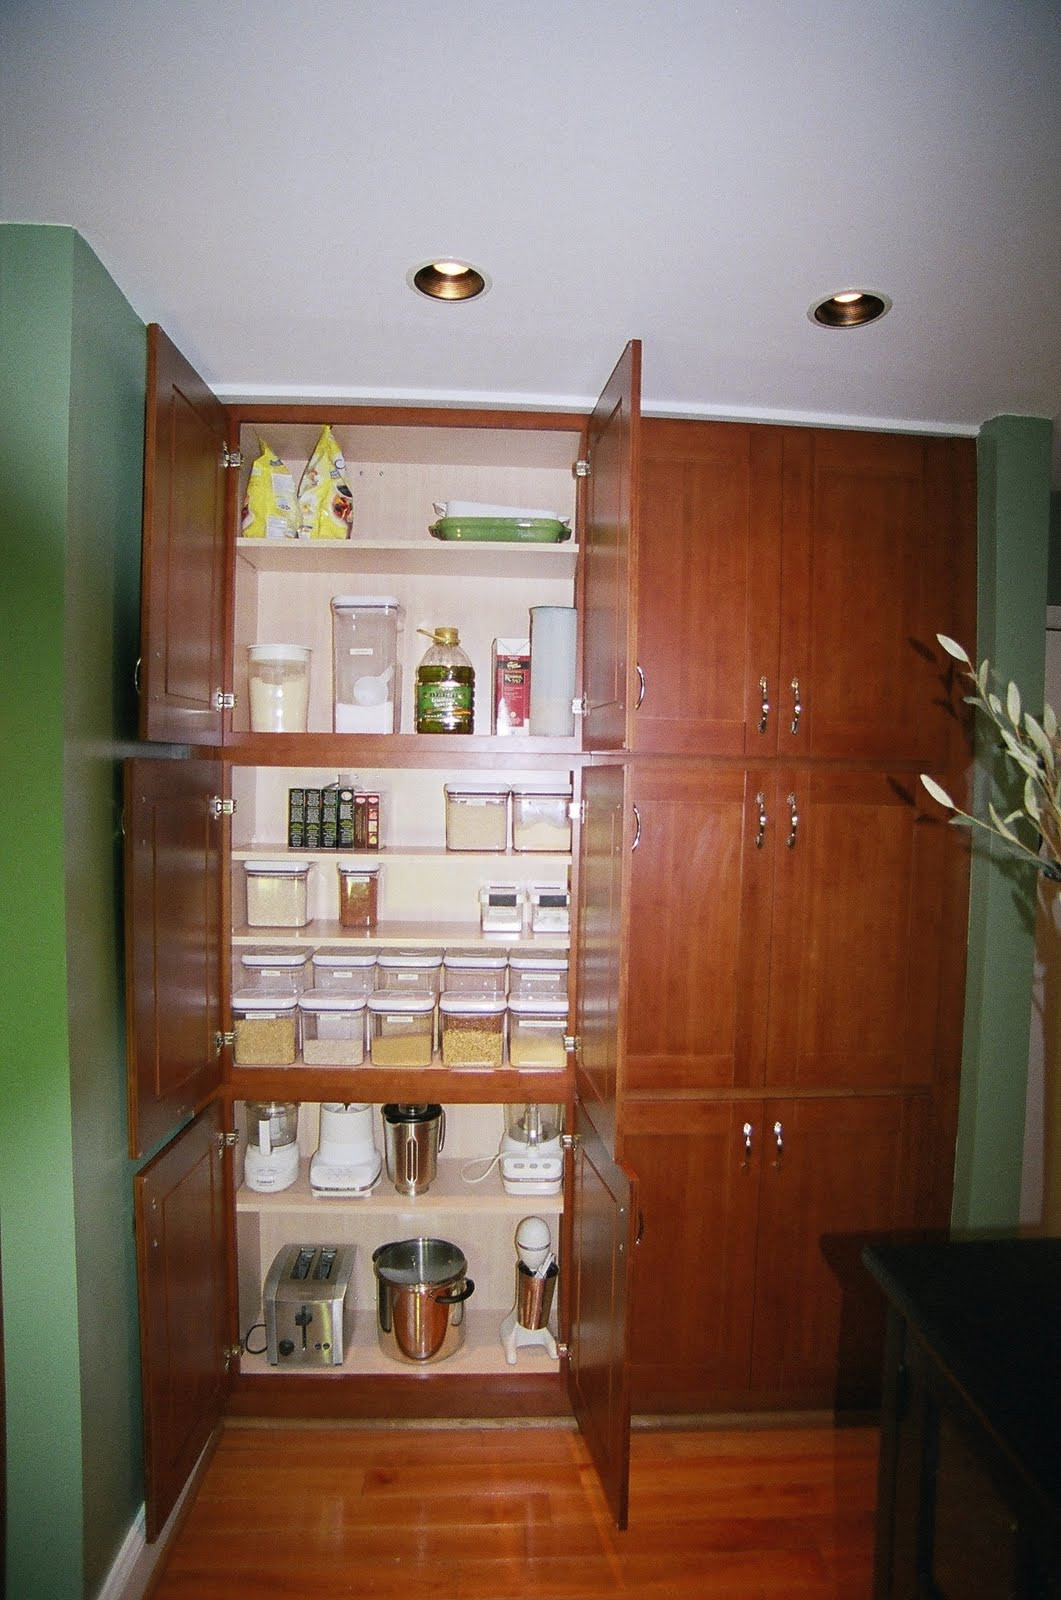 Floor To Ceiling Kitchen Pantry
 Lumberton NJ Home For Sale pantry & laundry Room